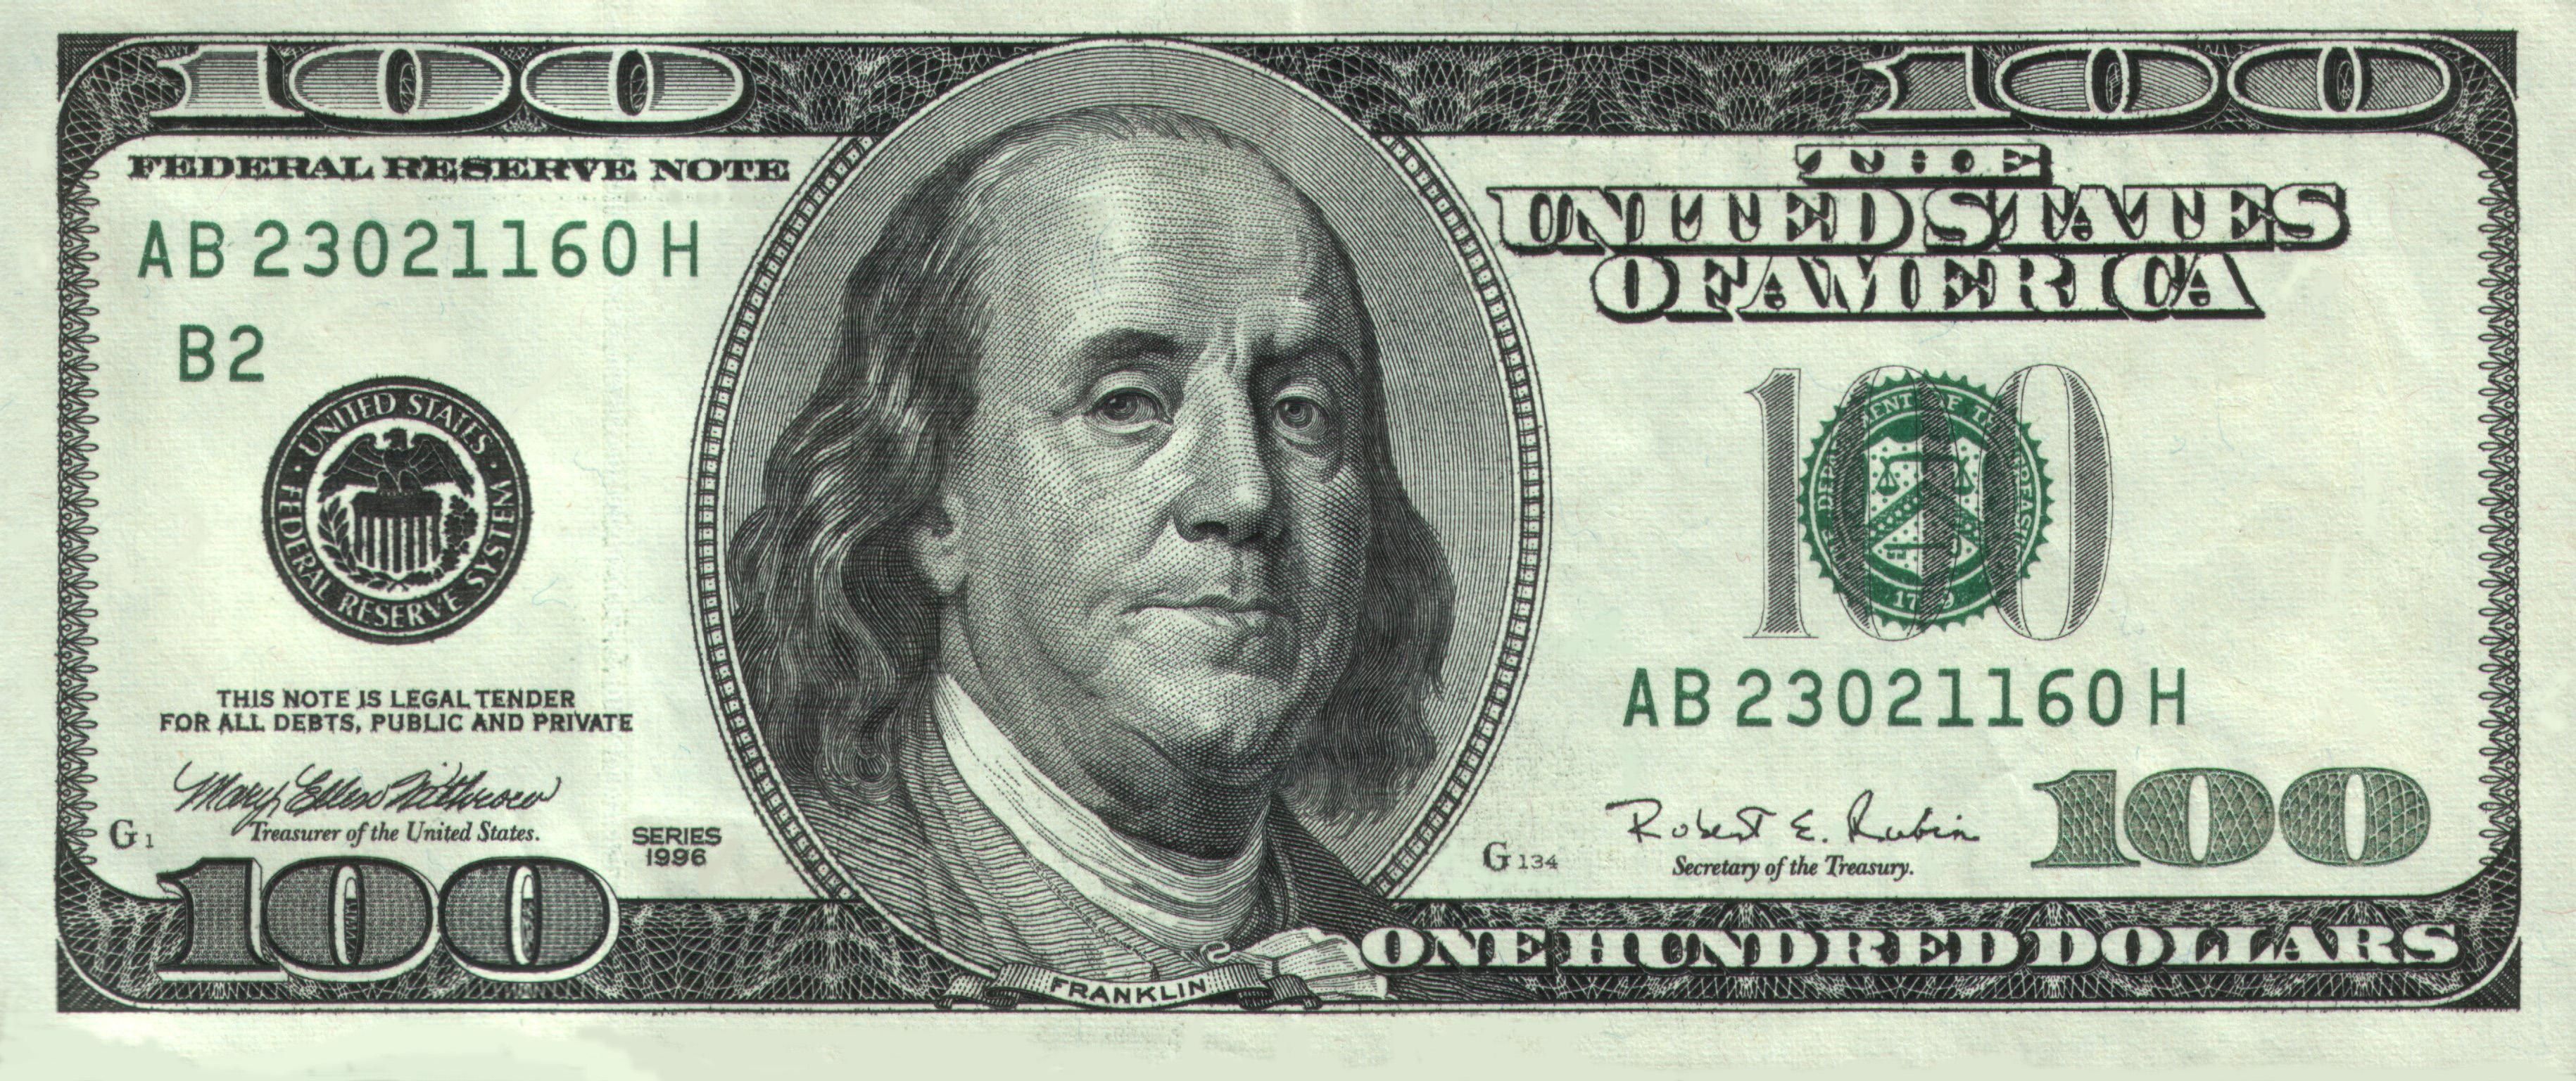 Who Picture On 100 Dollar Bill